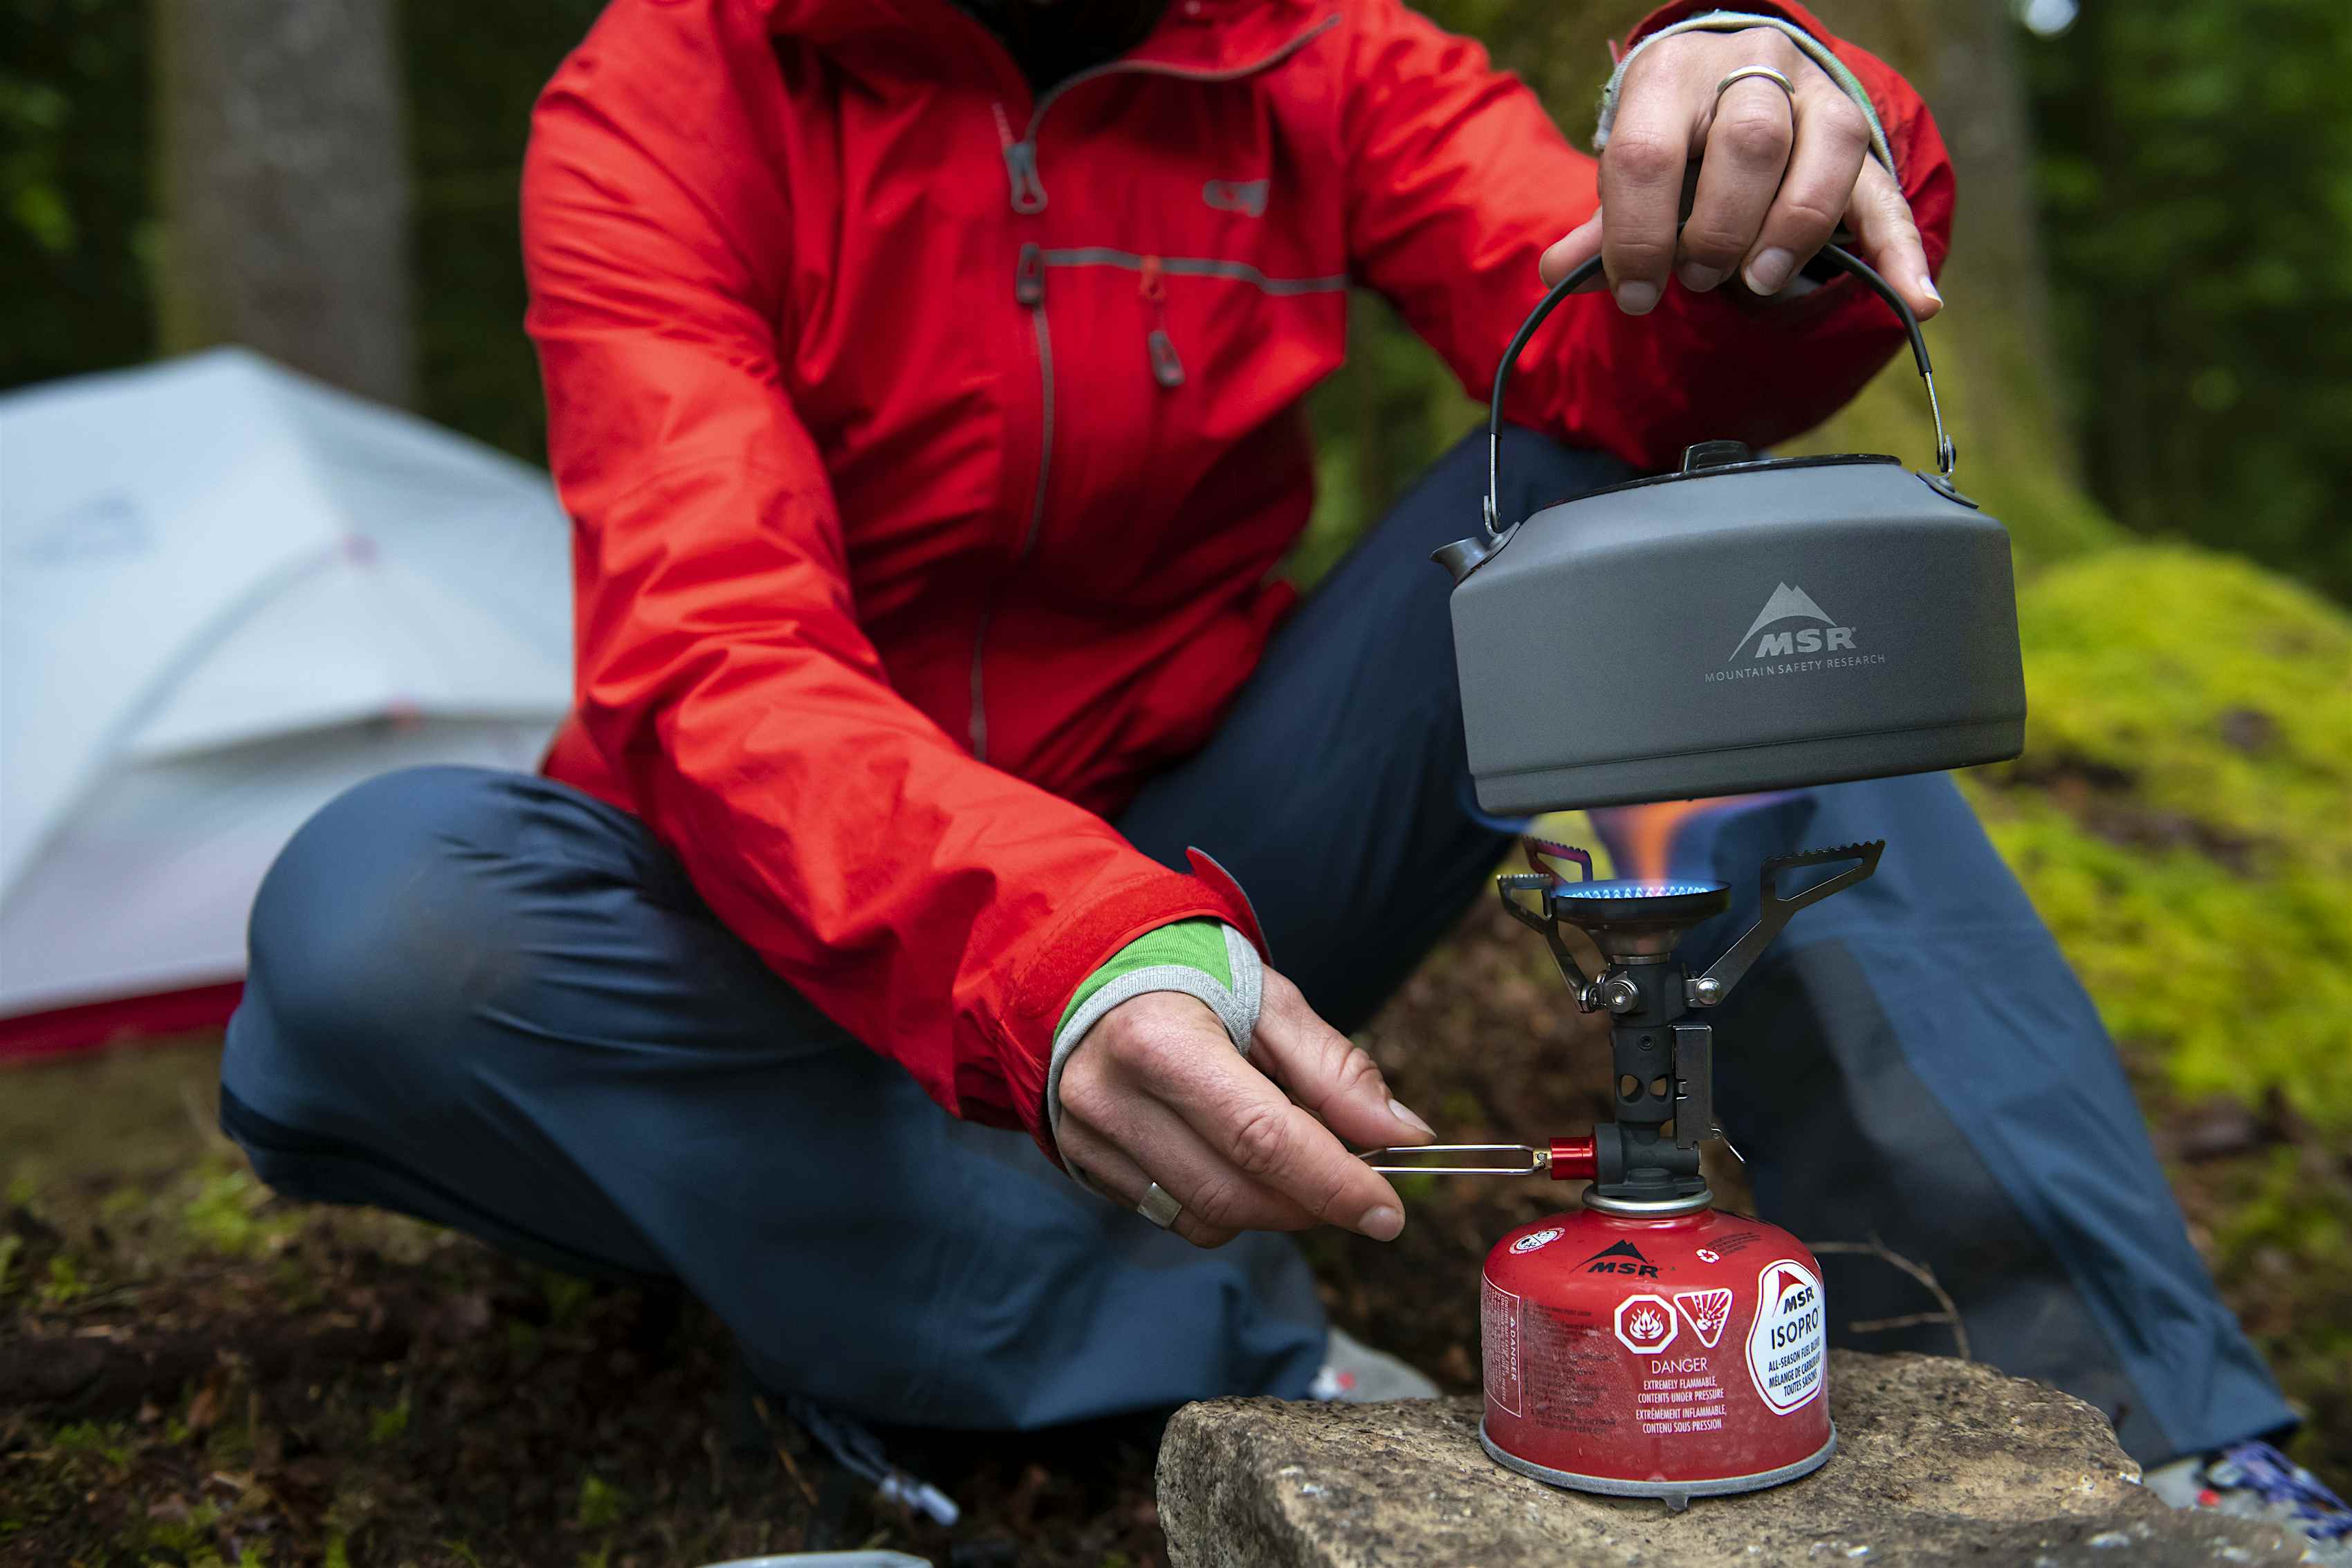 We tested 7 new gadgets that will upgrade your camping experience